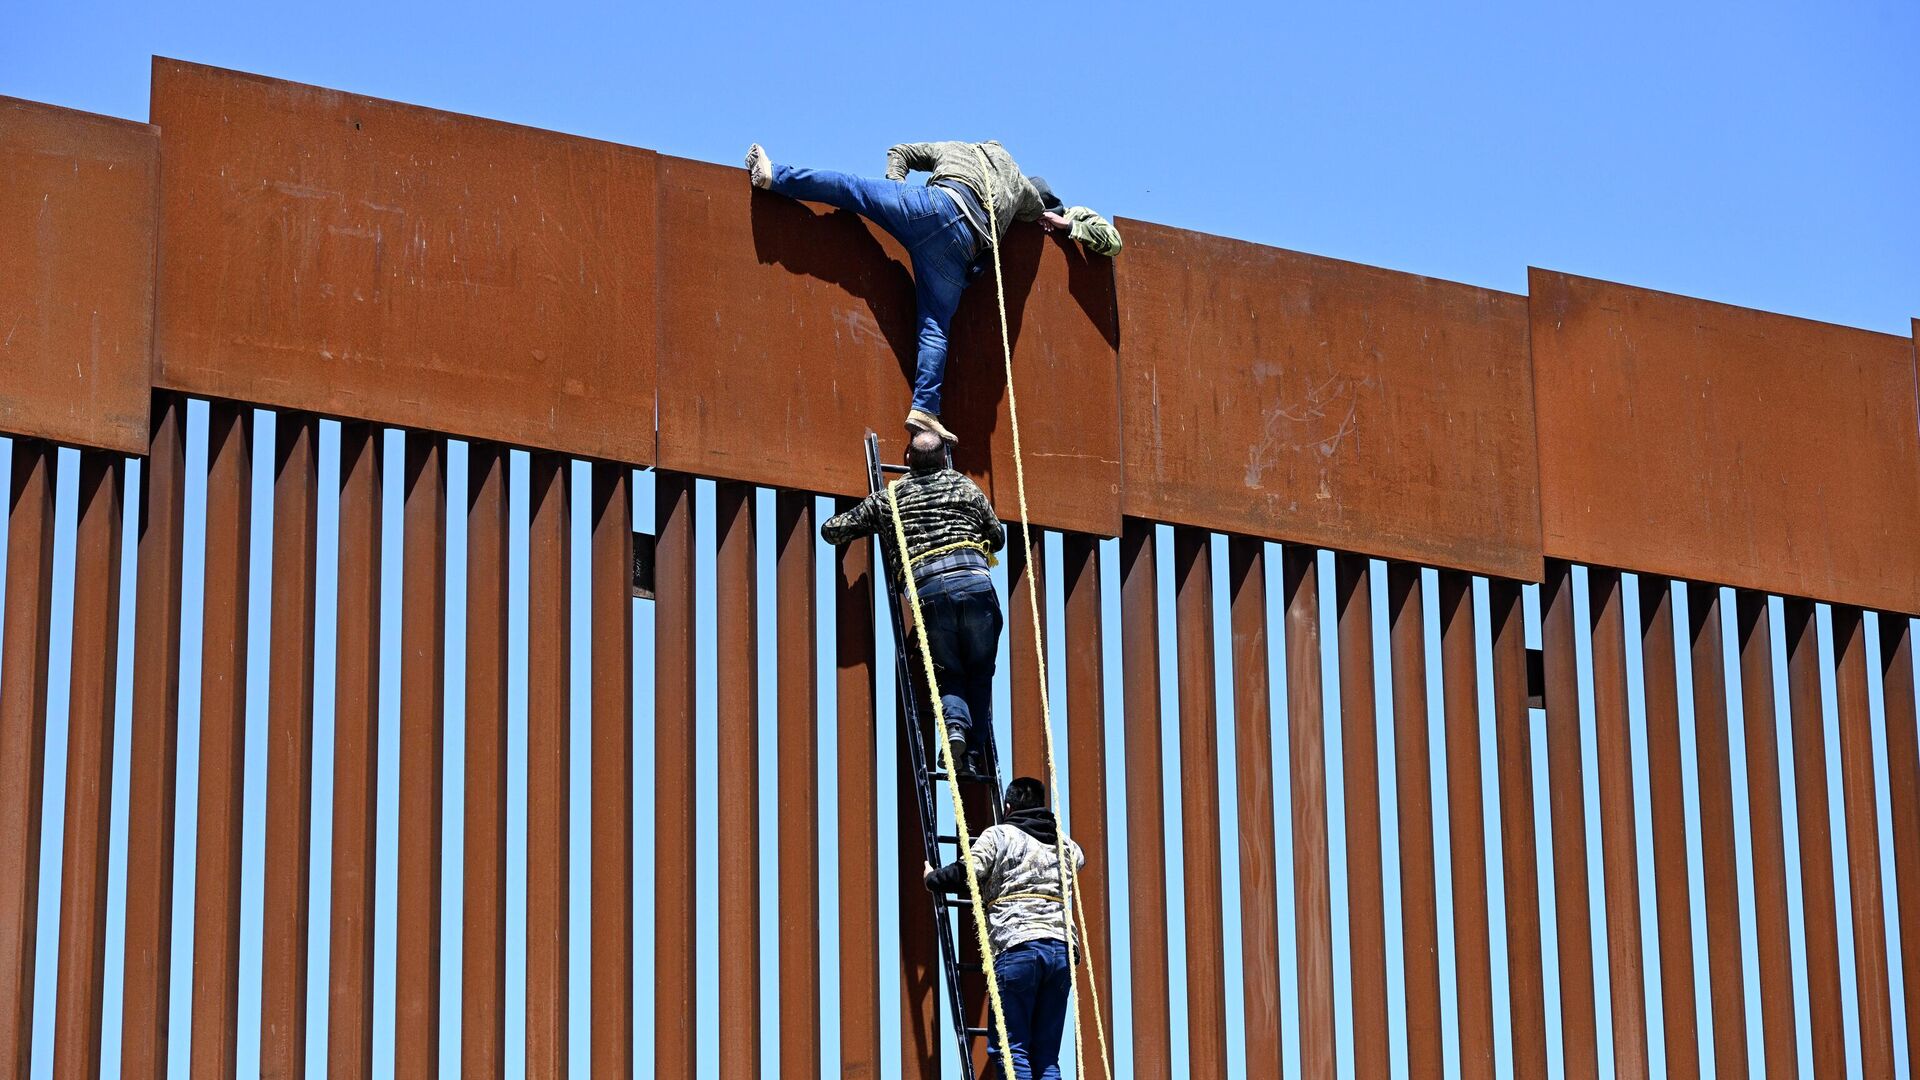 People use a ladder to scale the border fence at the US/Mexico border in Tecate, Mexico, Thursday, April 21, 2022. The men used the ropes to lower themselves down on the United States side. - Sputnik International, 1920, 06.05.2022